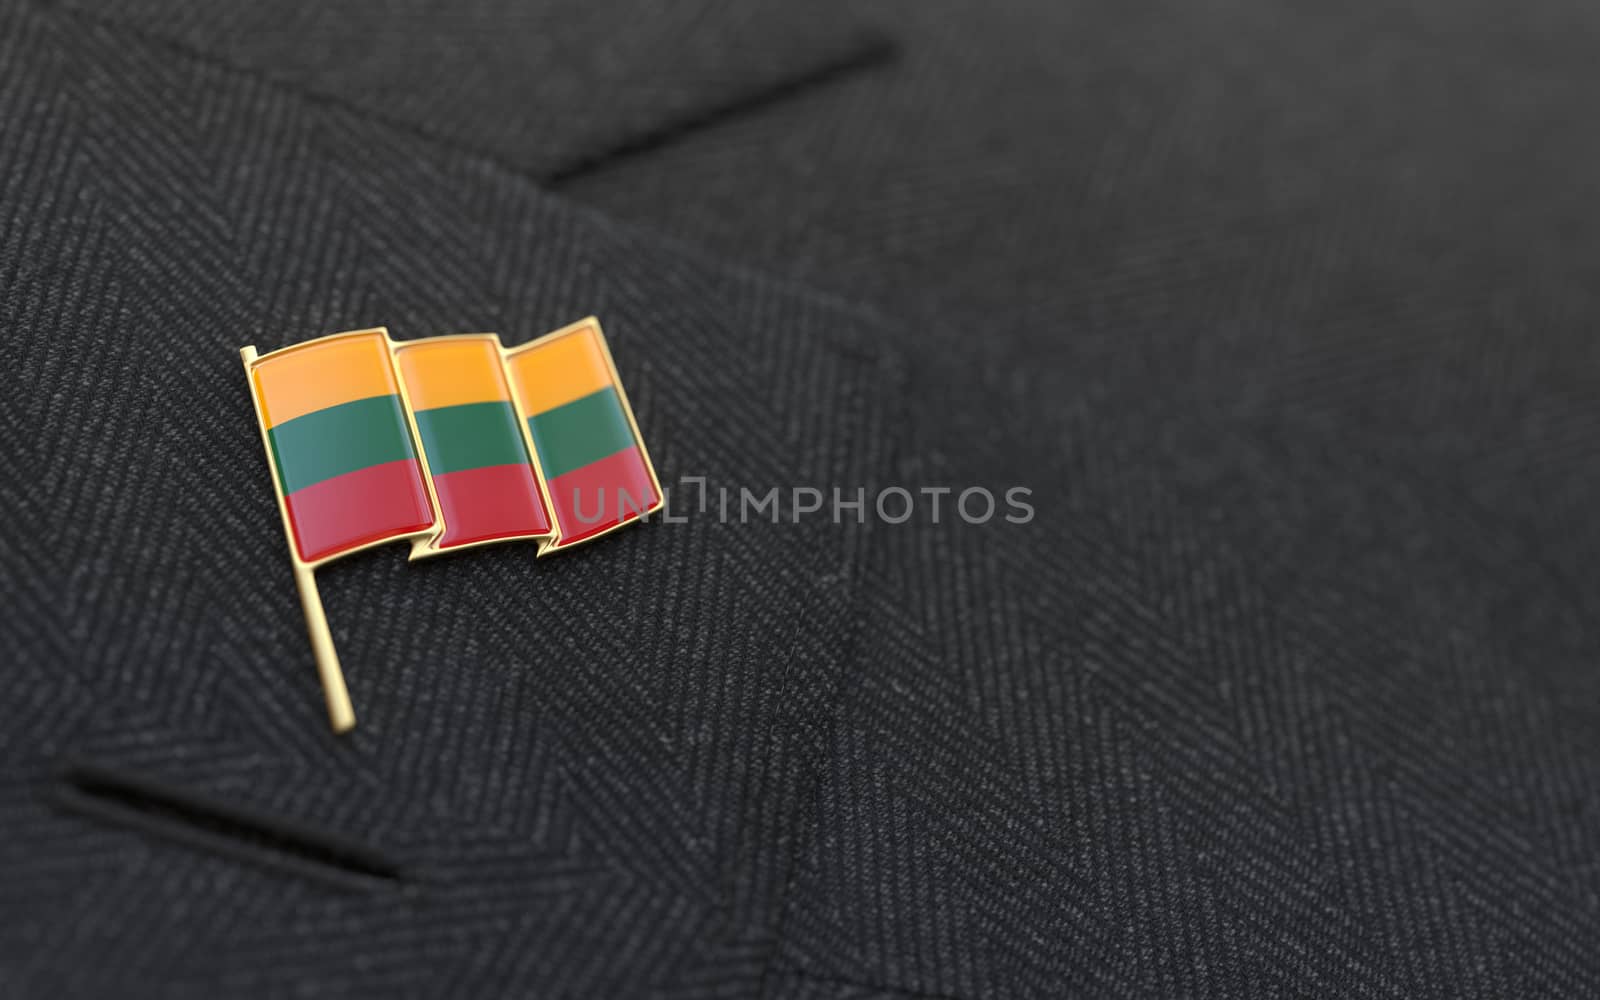 Lithuania flag lapel pin on the collar of a business suit jacket shows patriotism